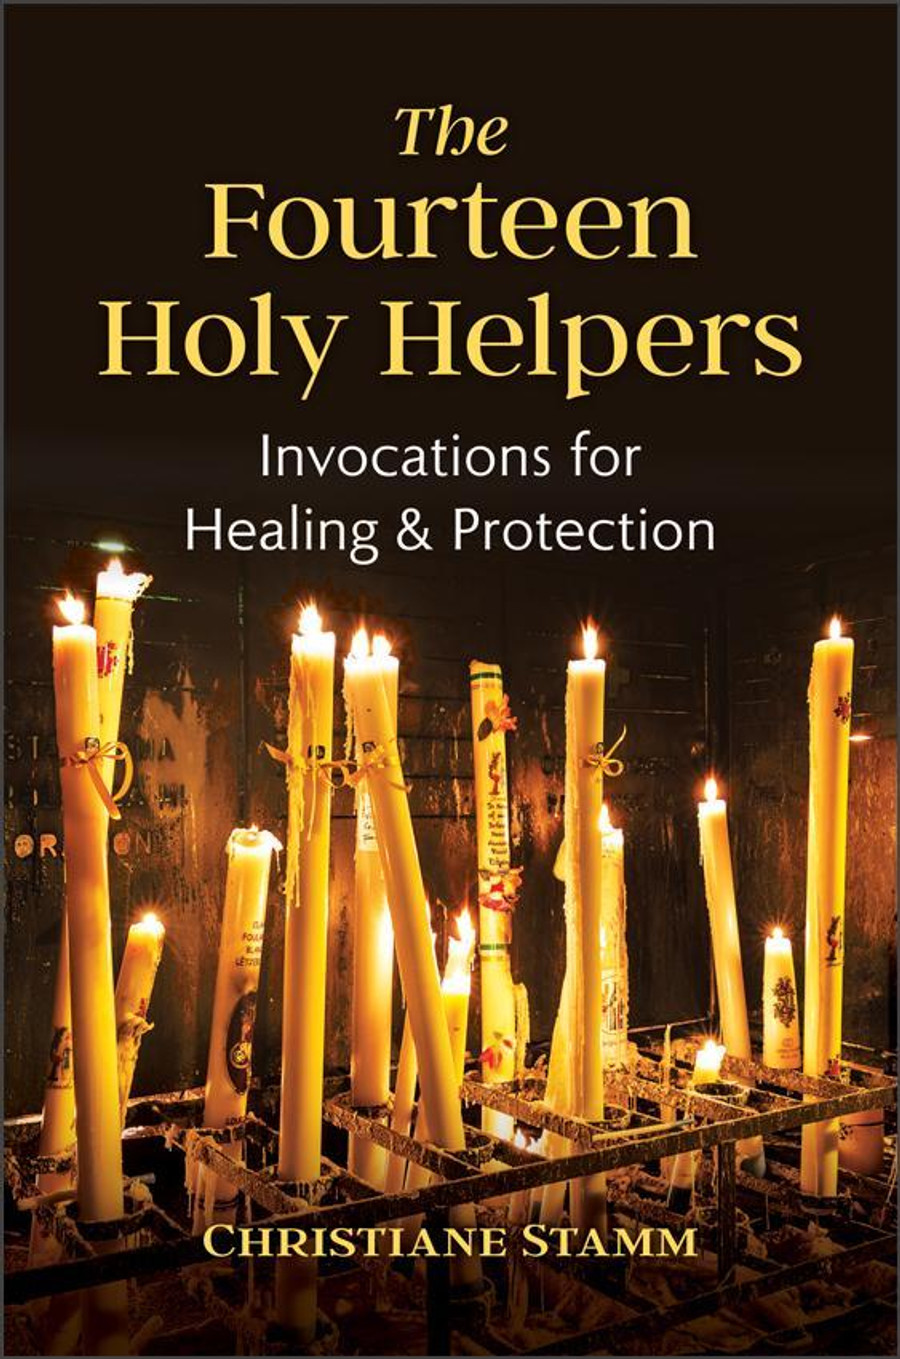 Fourteen Holy Helpers by Christine Stamm